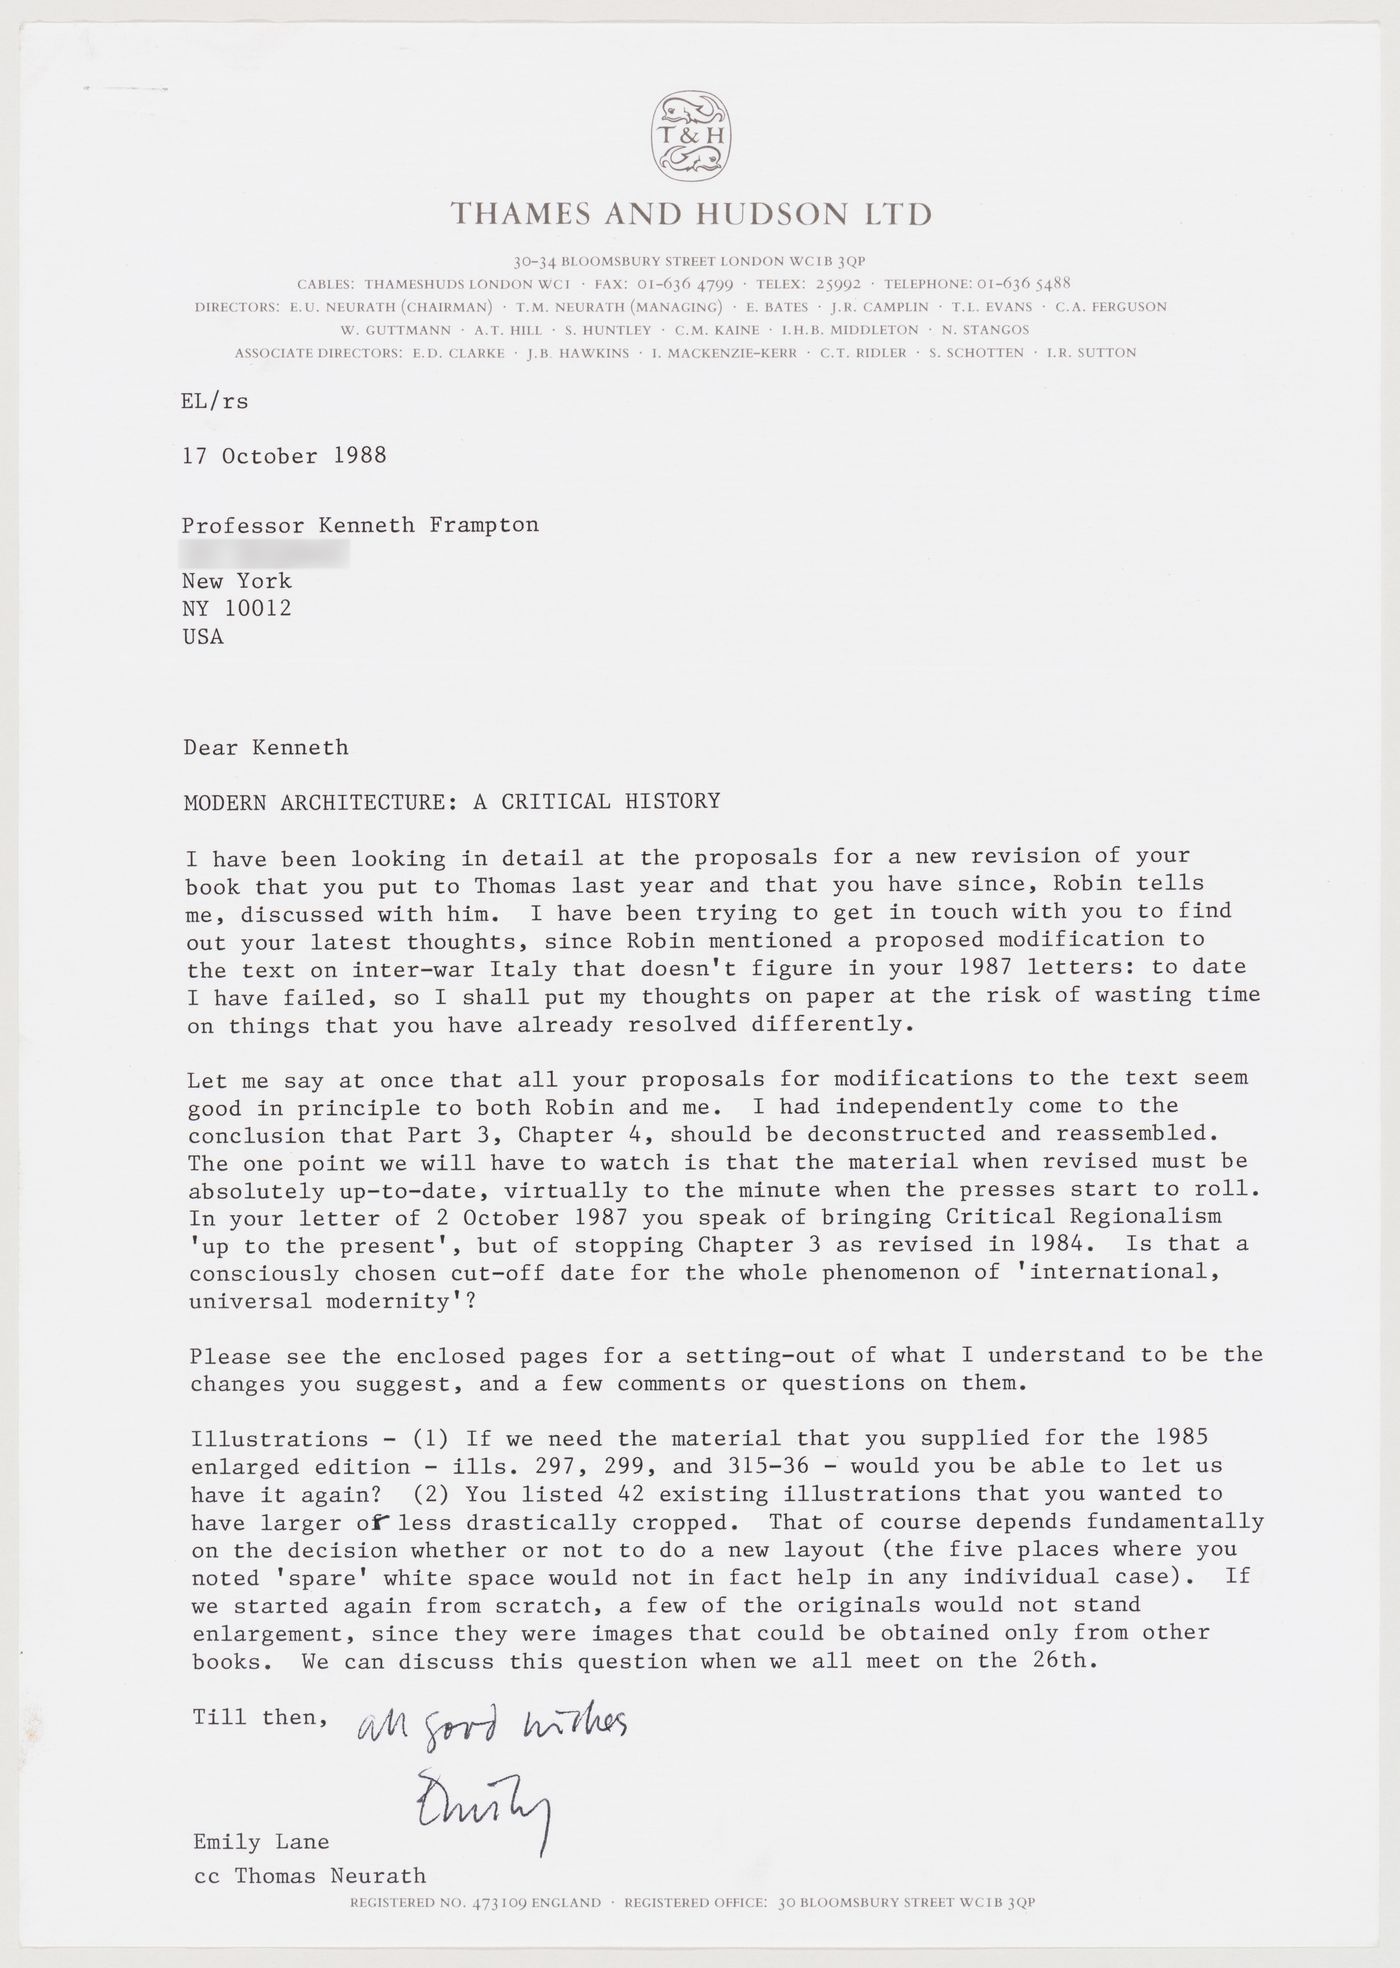 Letter from Emily Lane to Kenneth Frampton about revisions for  "Modern Architecture: A Critical History"